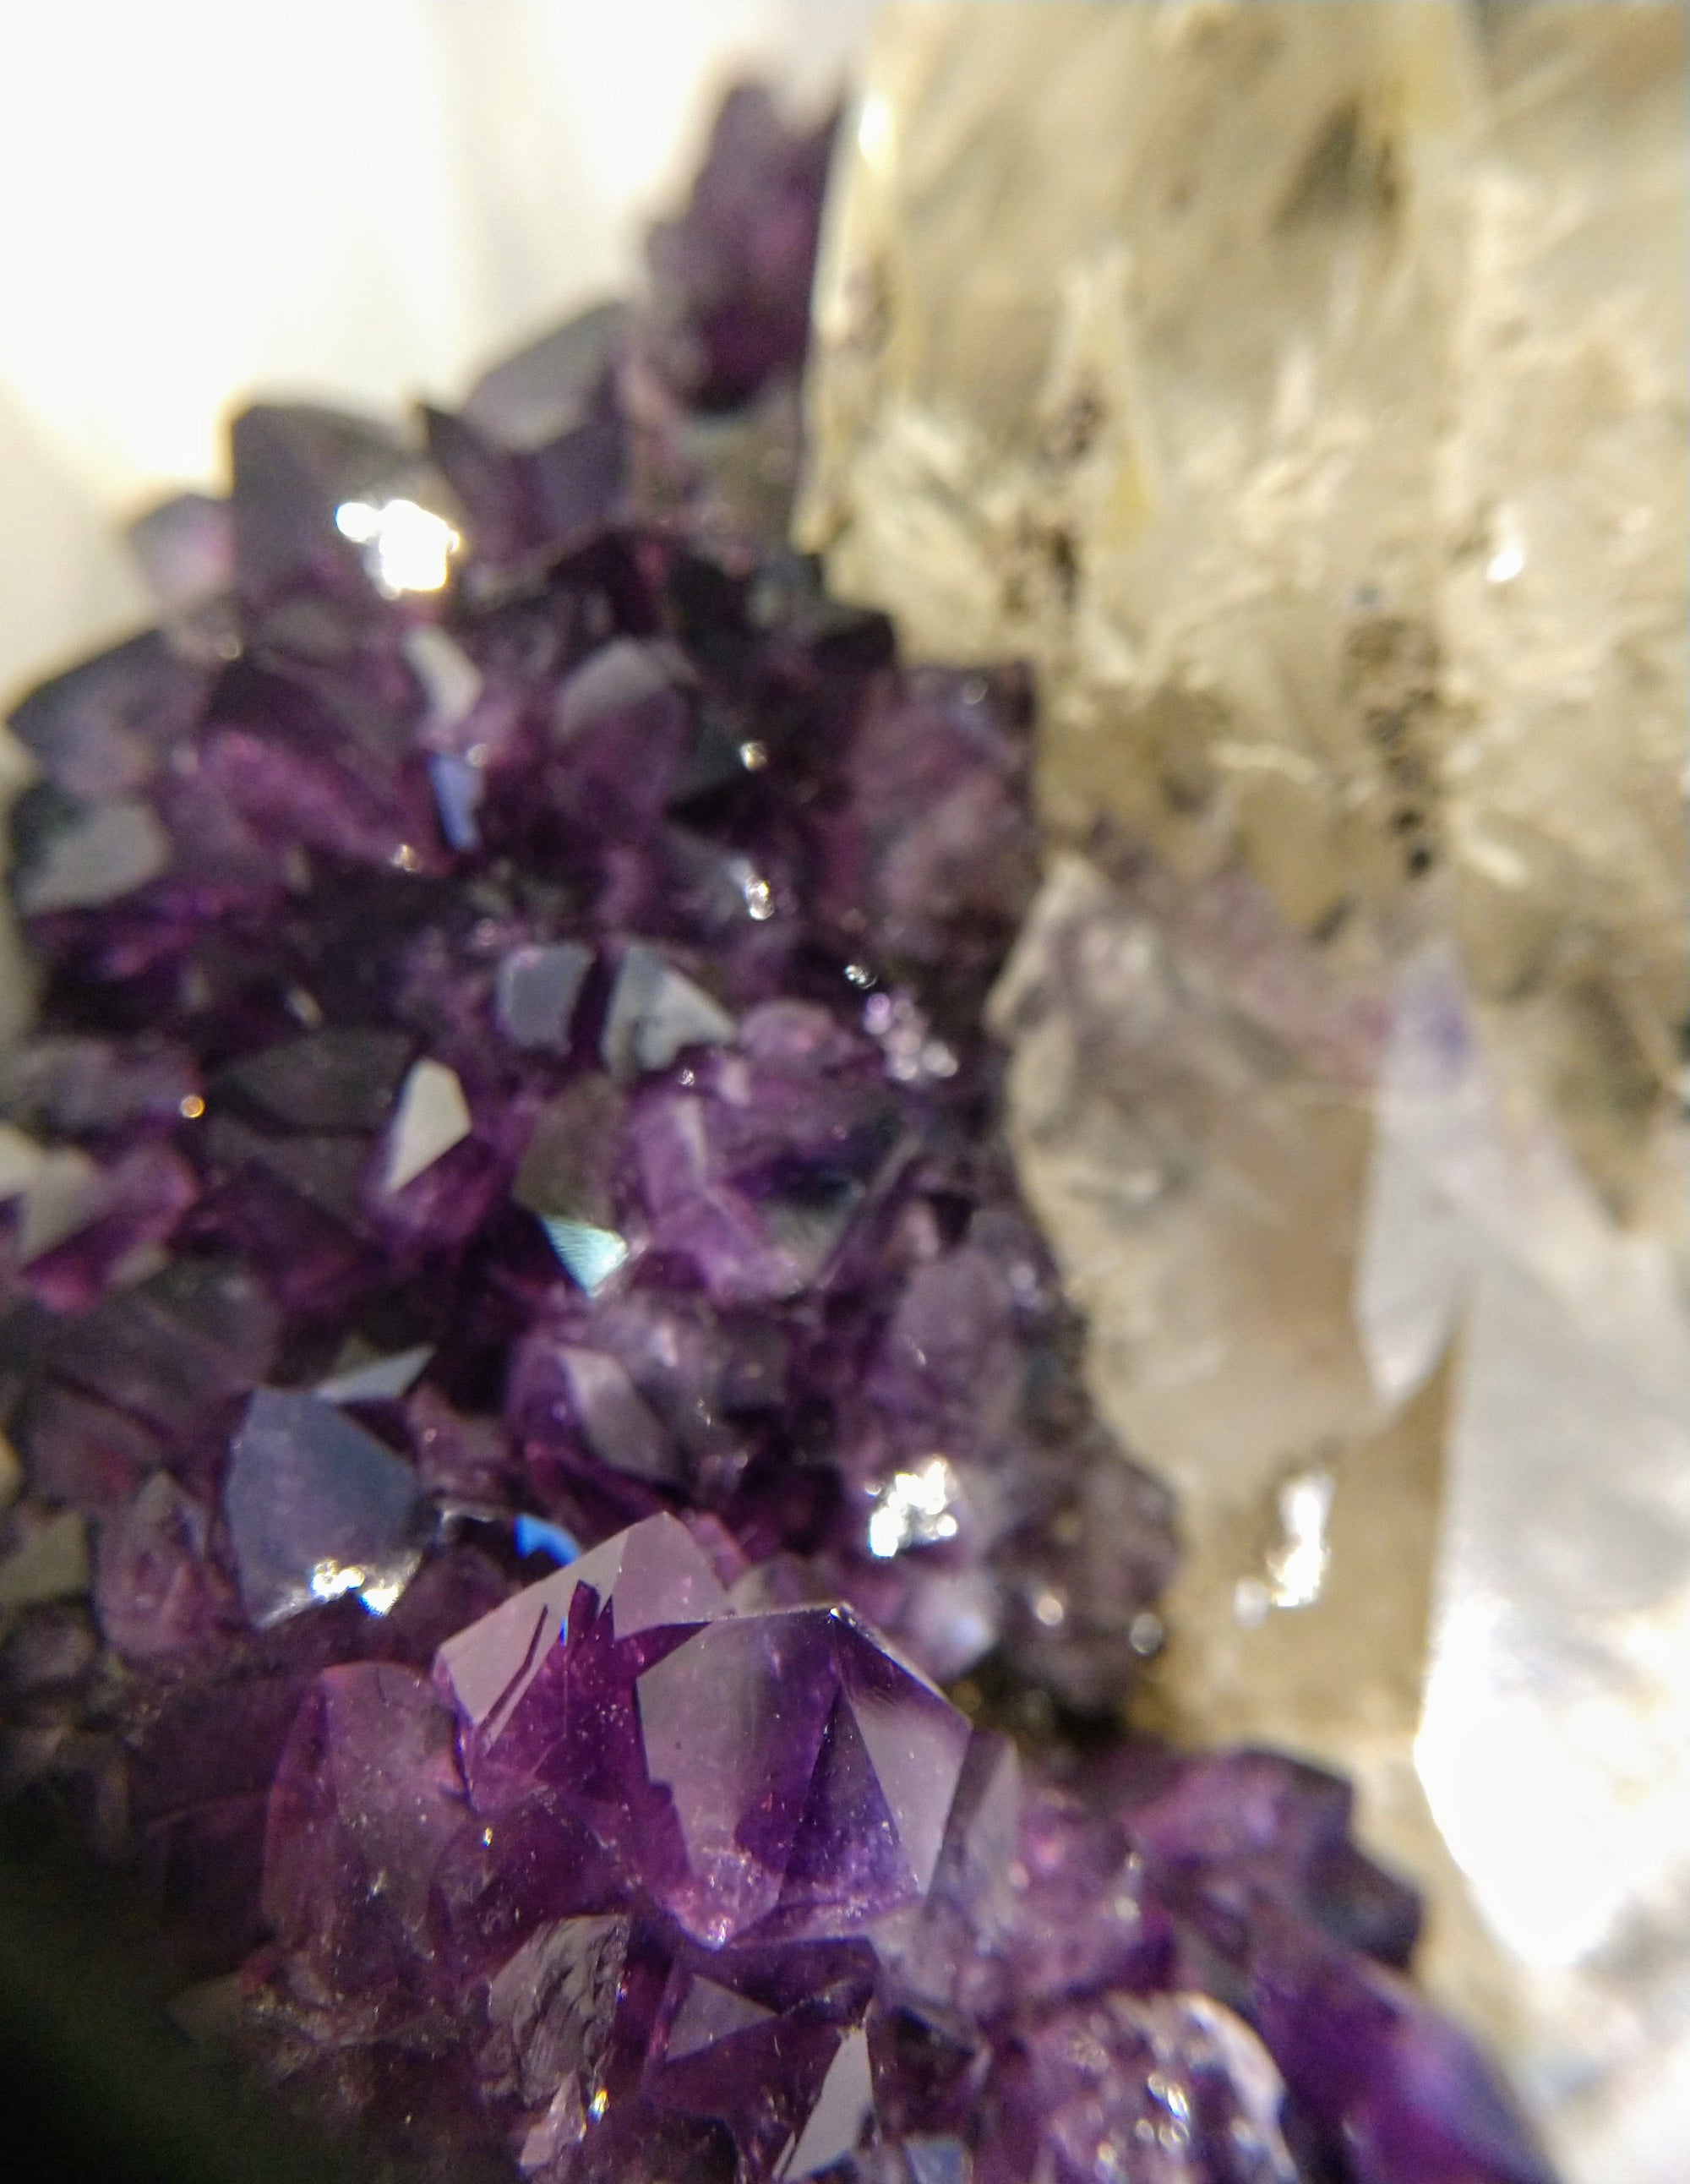 Amethyst with Calcite from Uruguay